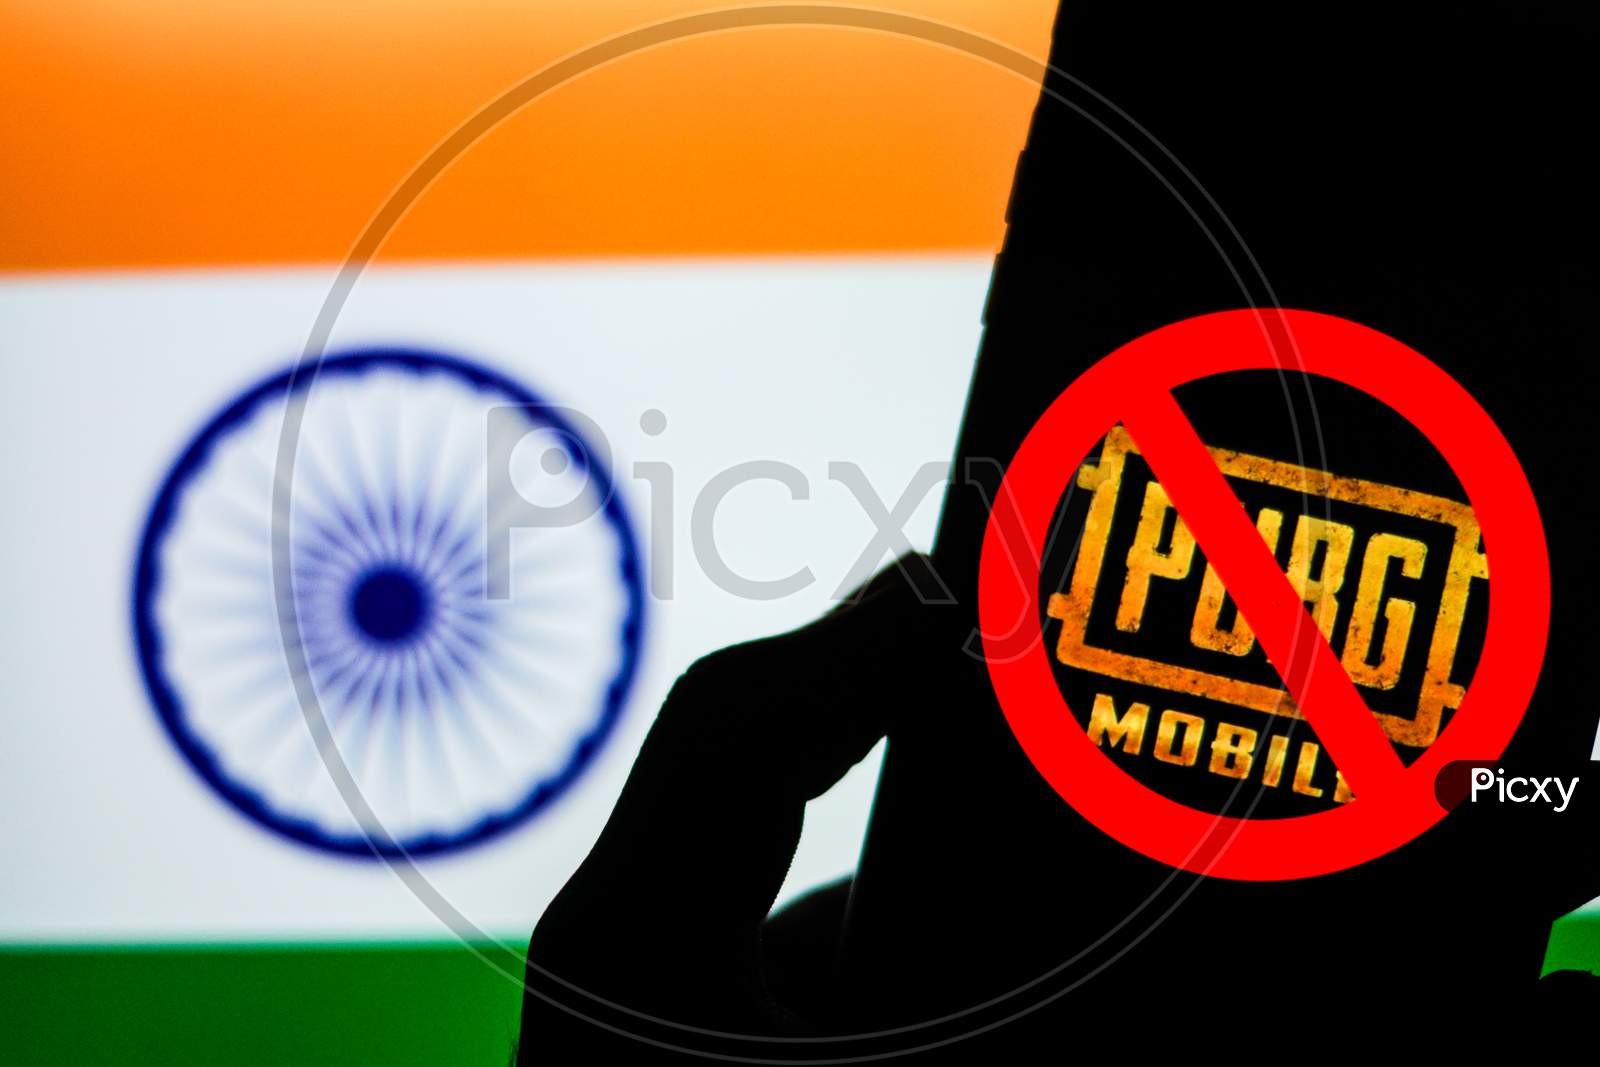 Banned PUBG or Playerunknown's Battlegrounds Game Logo on Smartphone Screen with Indian Flag in the Background